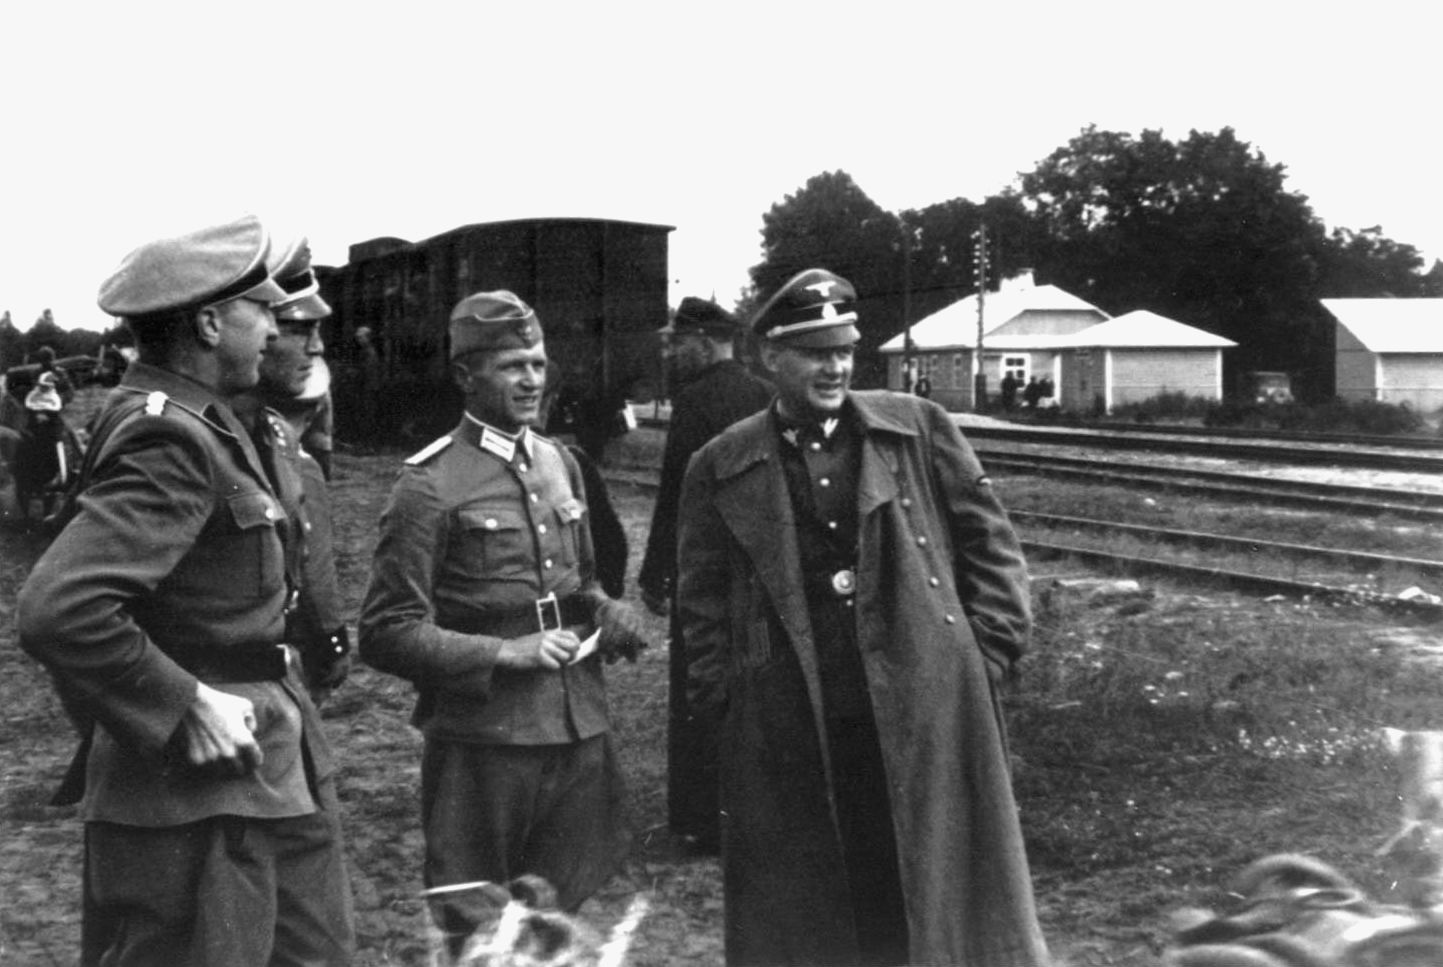 SS Commander Goblocnik and other officers tour the site of the Sobibor concentration camp during its construction.